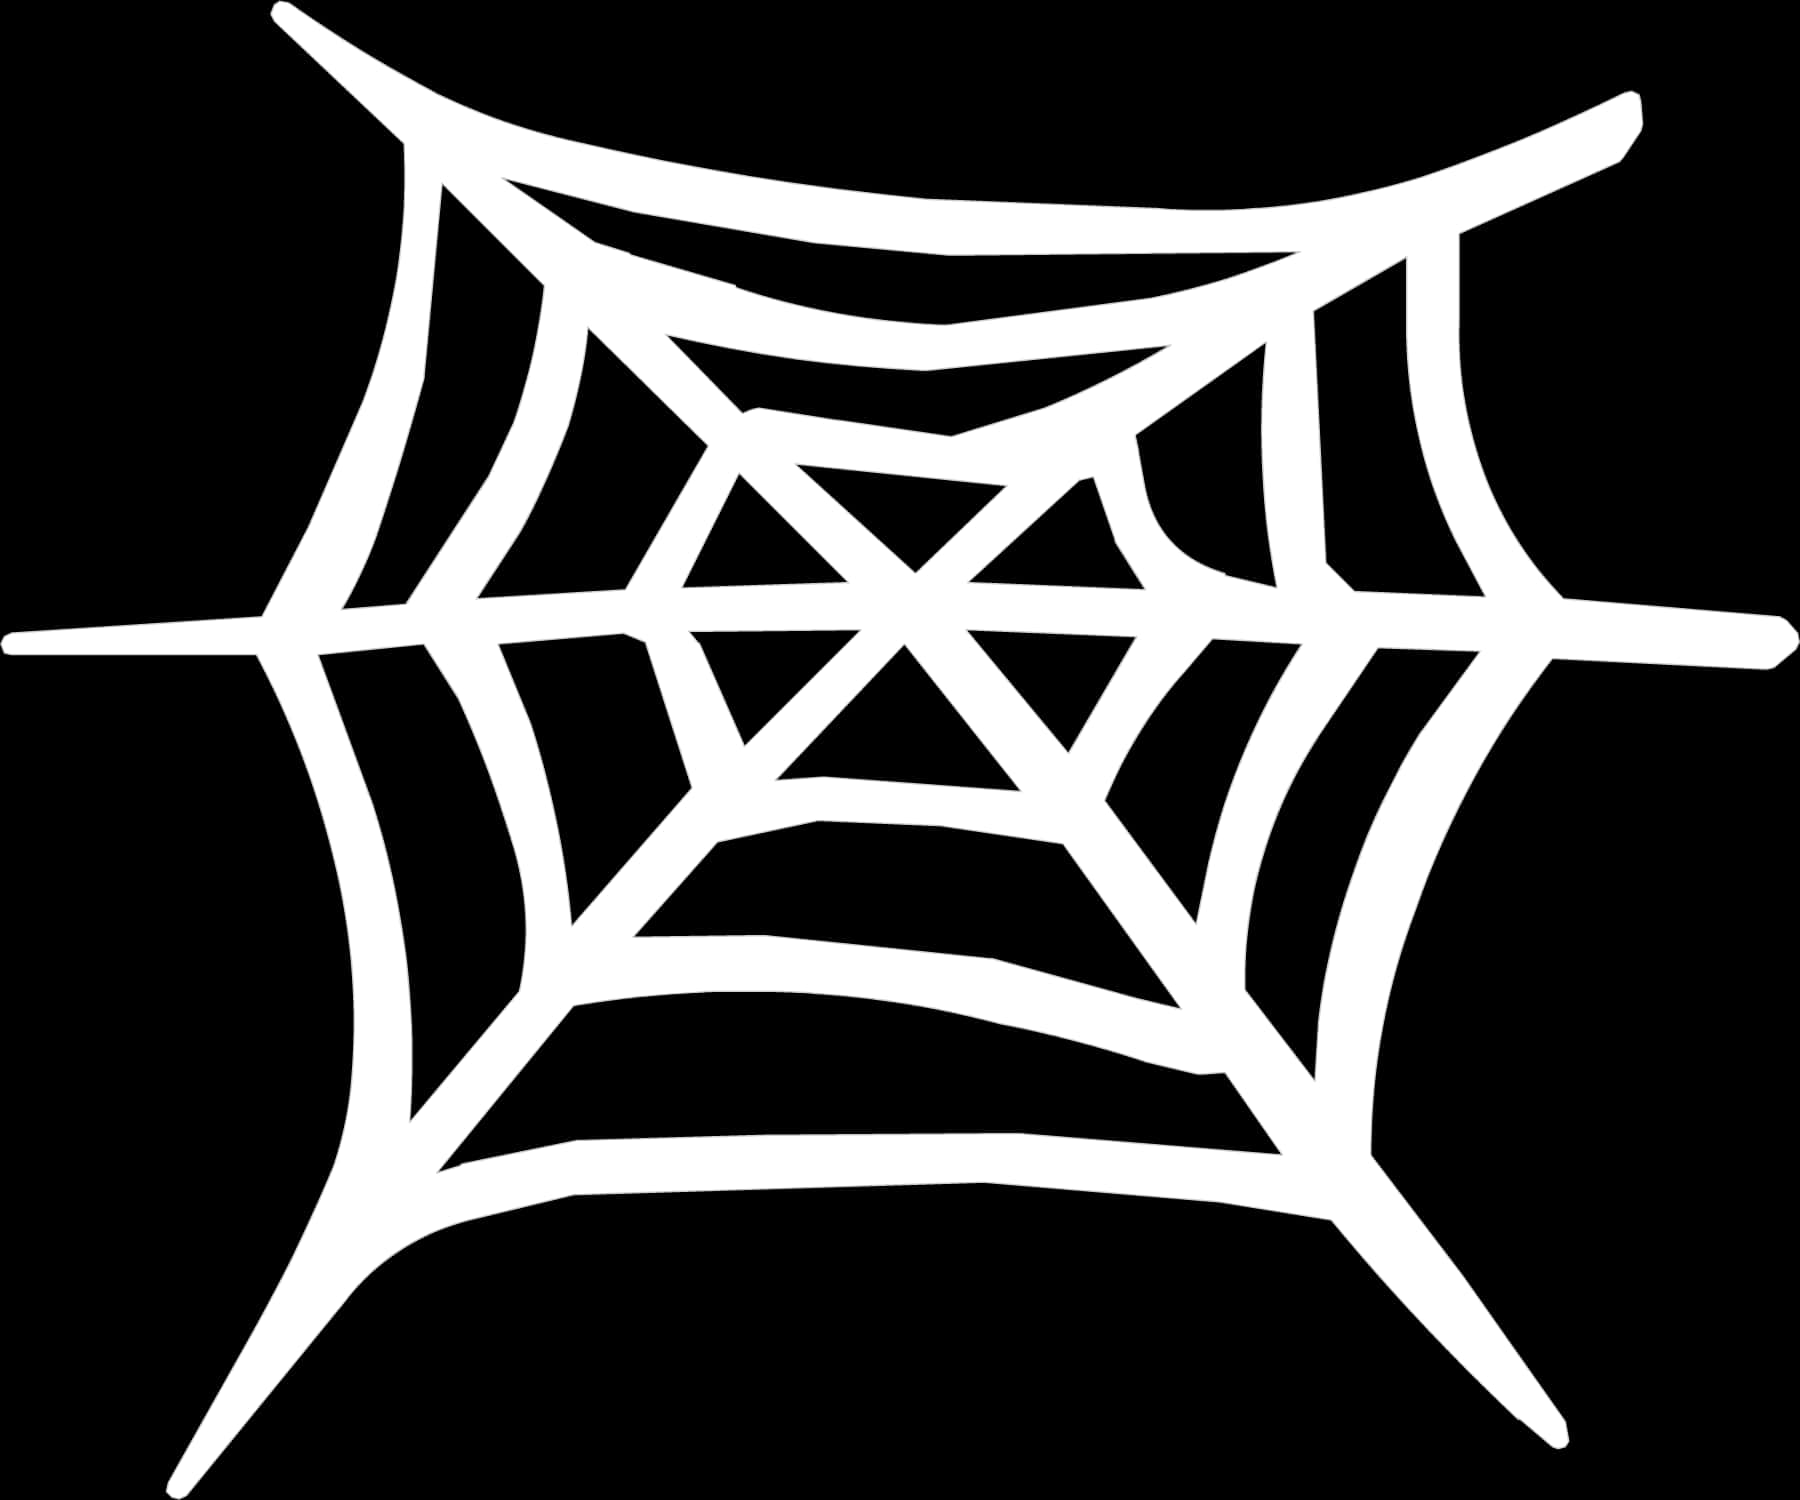 Simplified Spider Web Graphic PNG